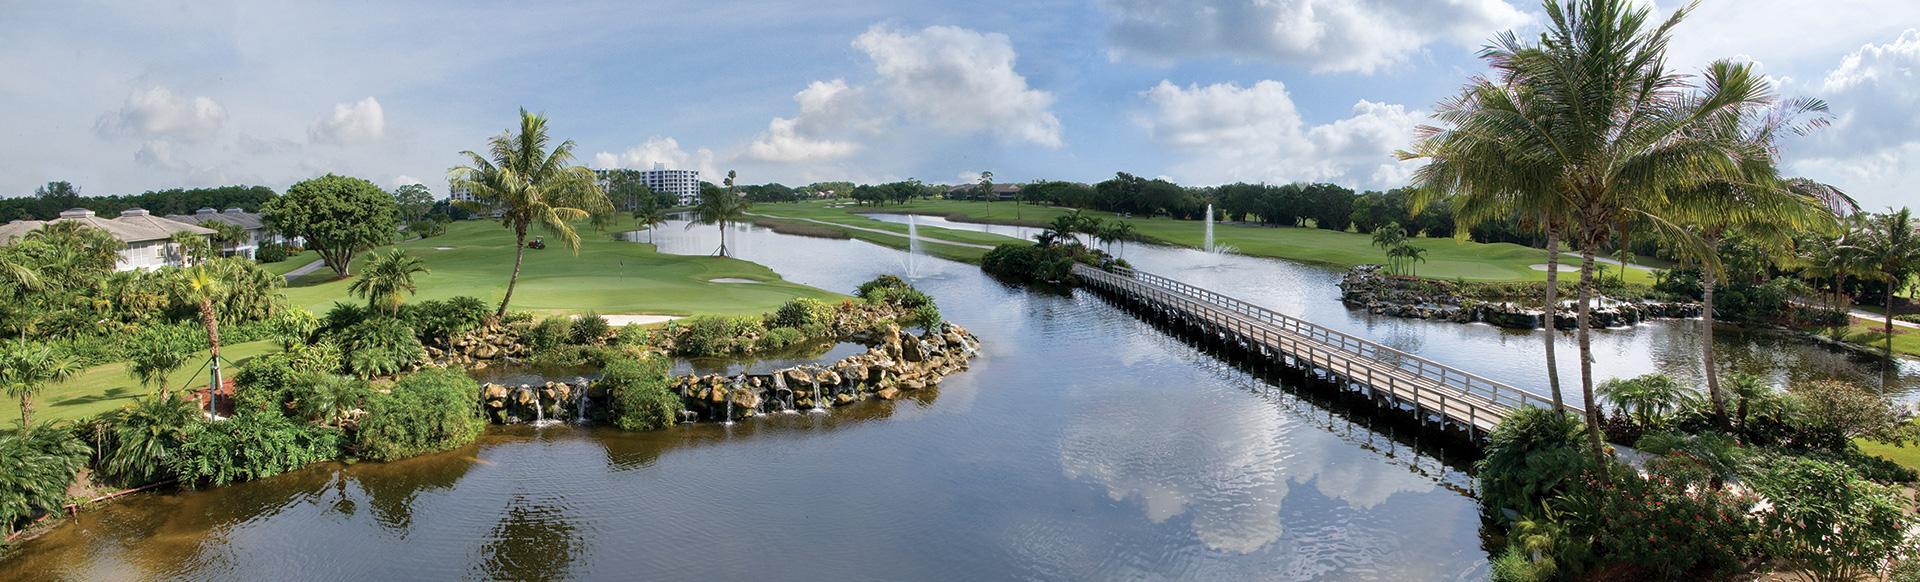 Golf Courses at Boca West Country Club in Boca Raton